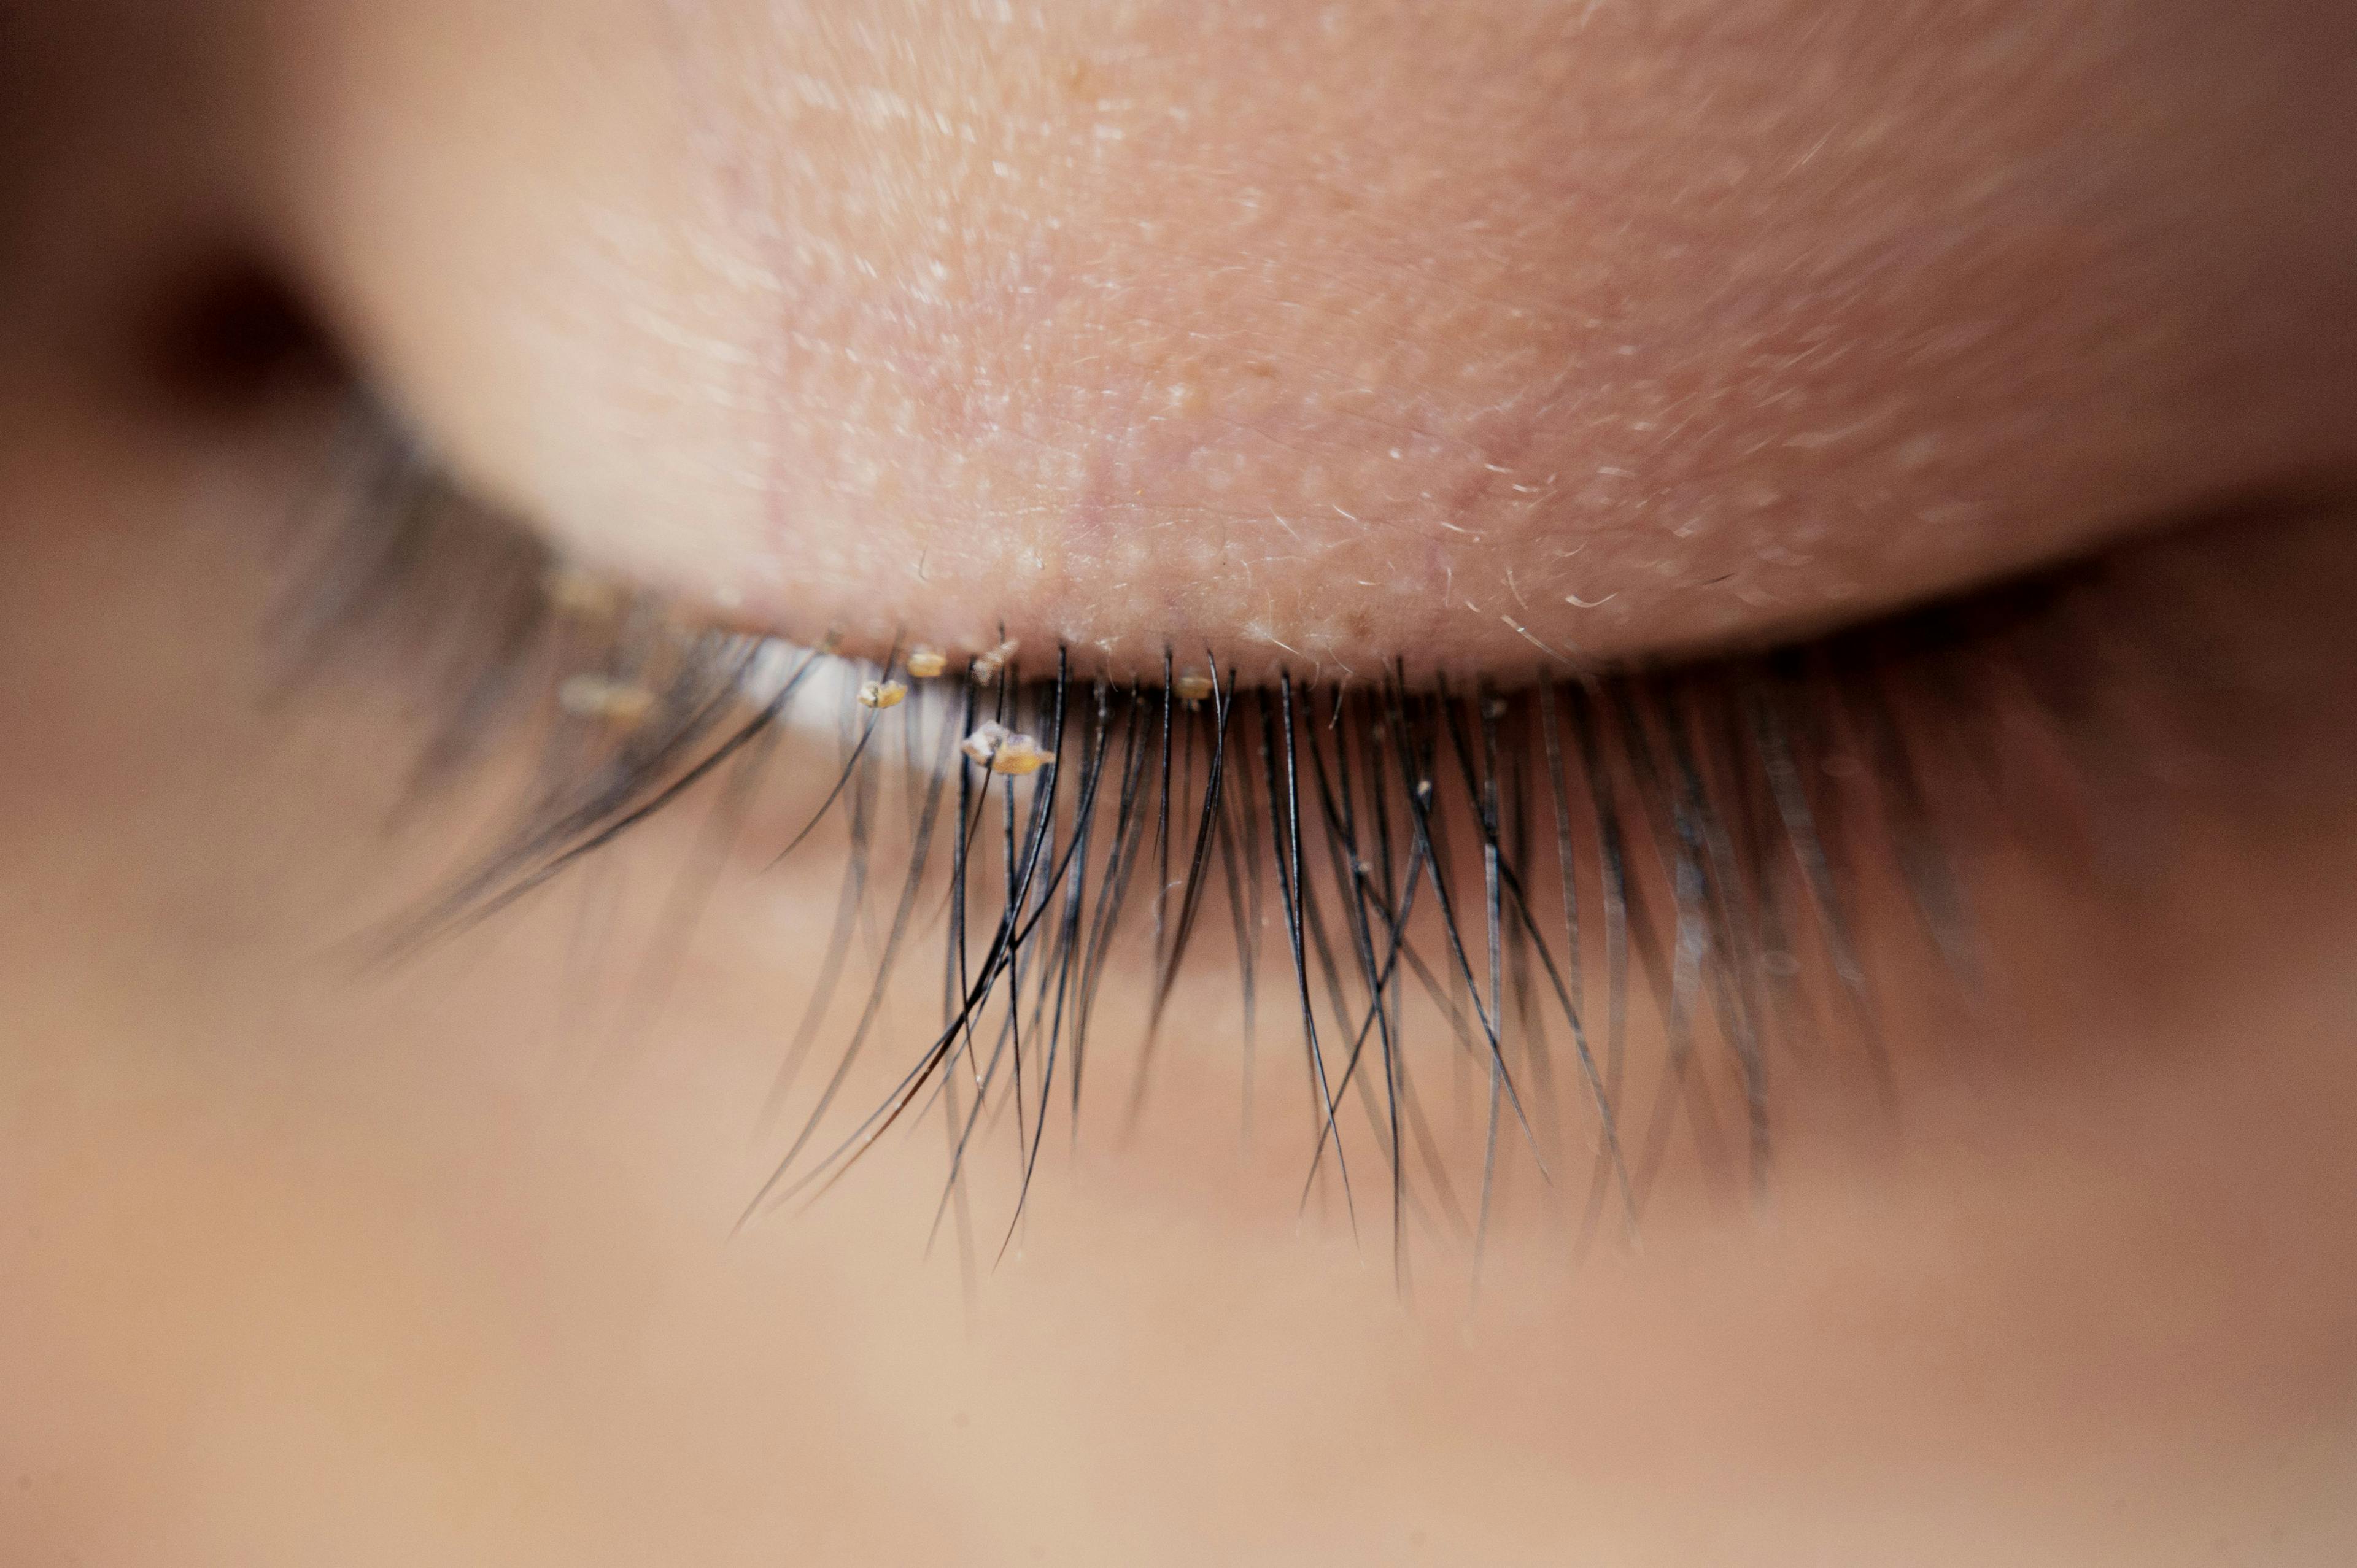 Tarsus is awaiting FDA approval later this year of TP-03, a 0.25% lotilaner ophthalmic solution for the treatment of Demodex blepharitis. (Image courtesy of Adobe Stock/ohishiftl)